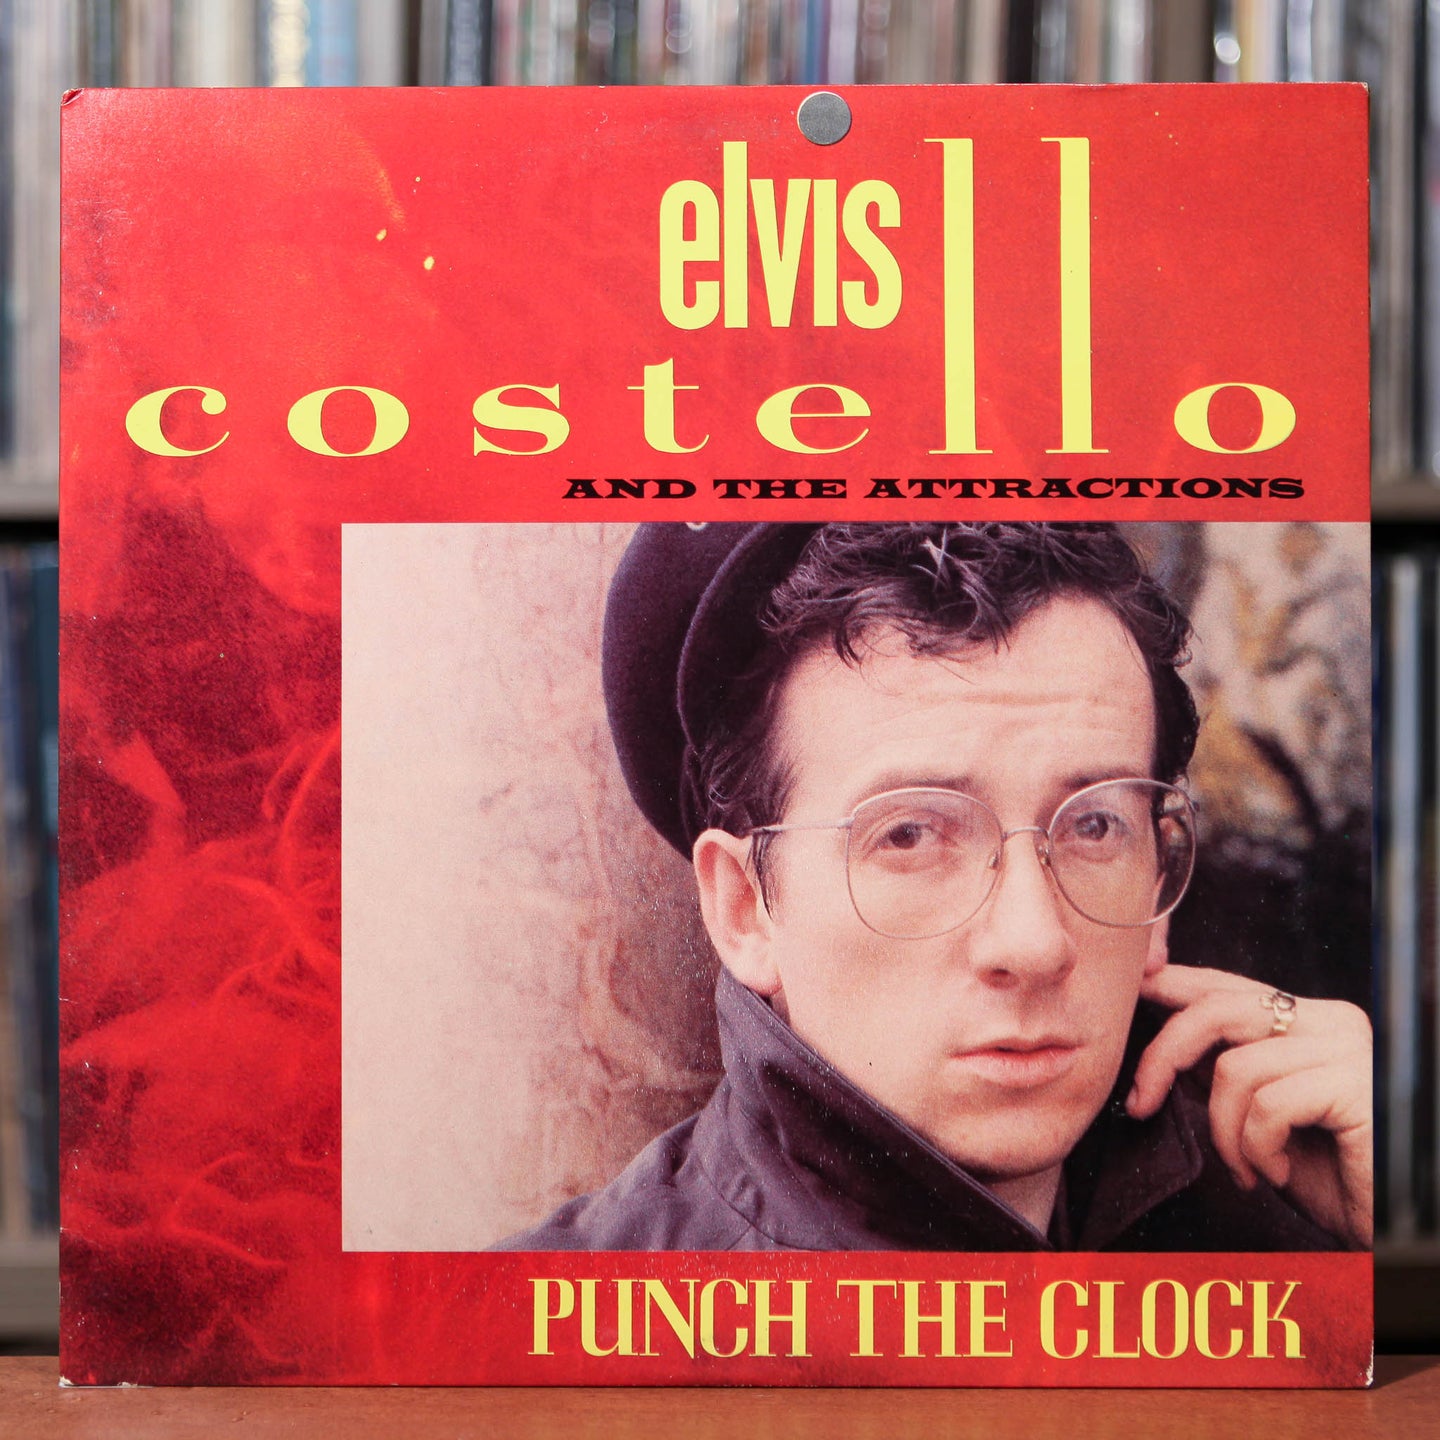 Elvis Costello And The Attractions - Punch The Clock - 1983 Columbia, VG+/VG++